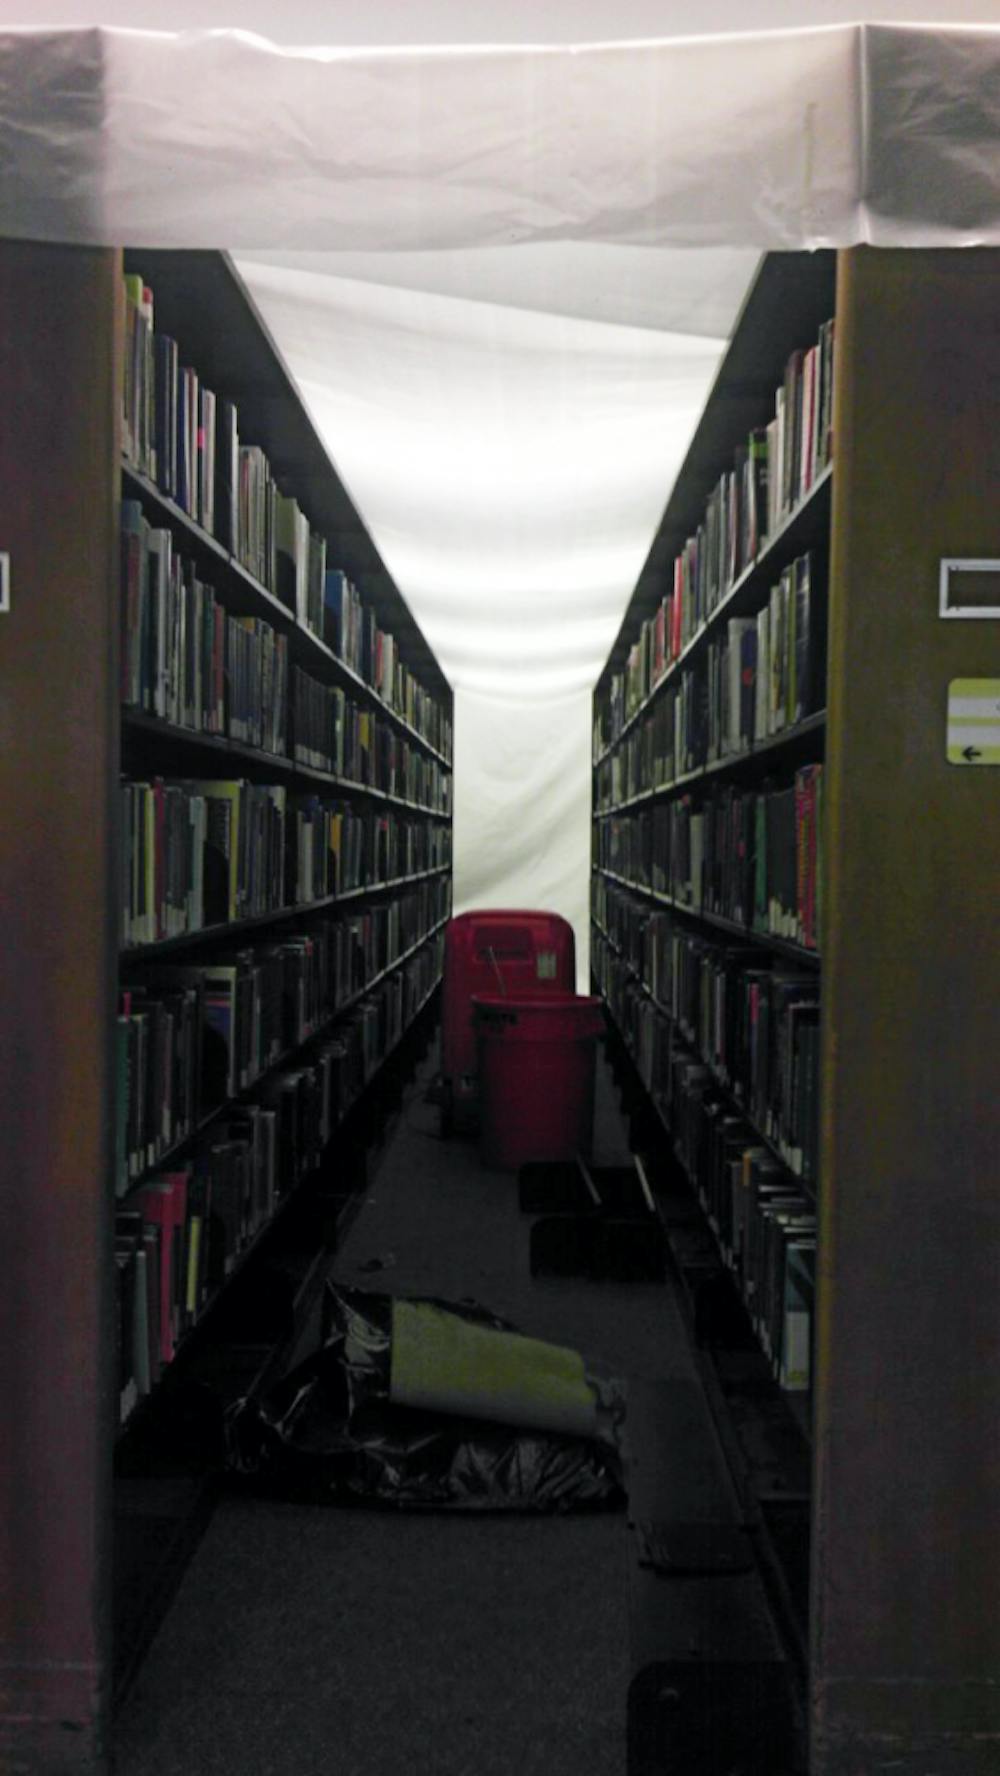 	Bookshelves in the Biomedical library were put under a plastic cover to protect from further water damage.